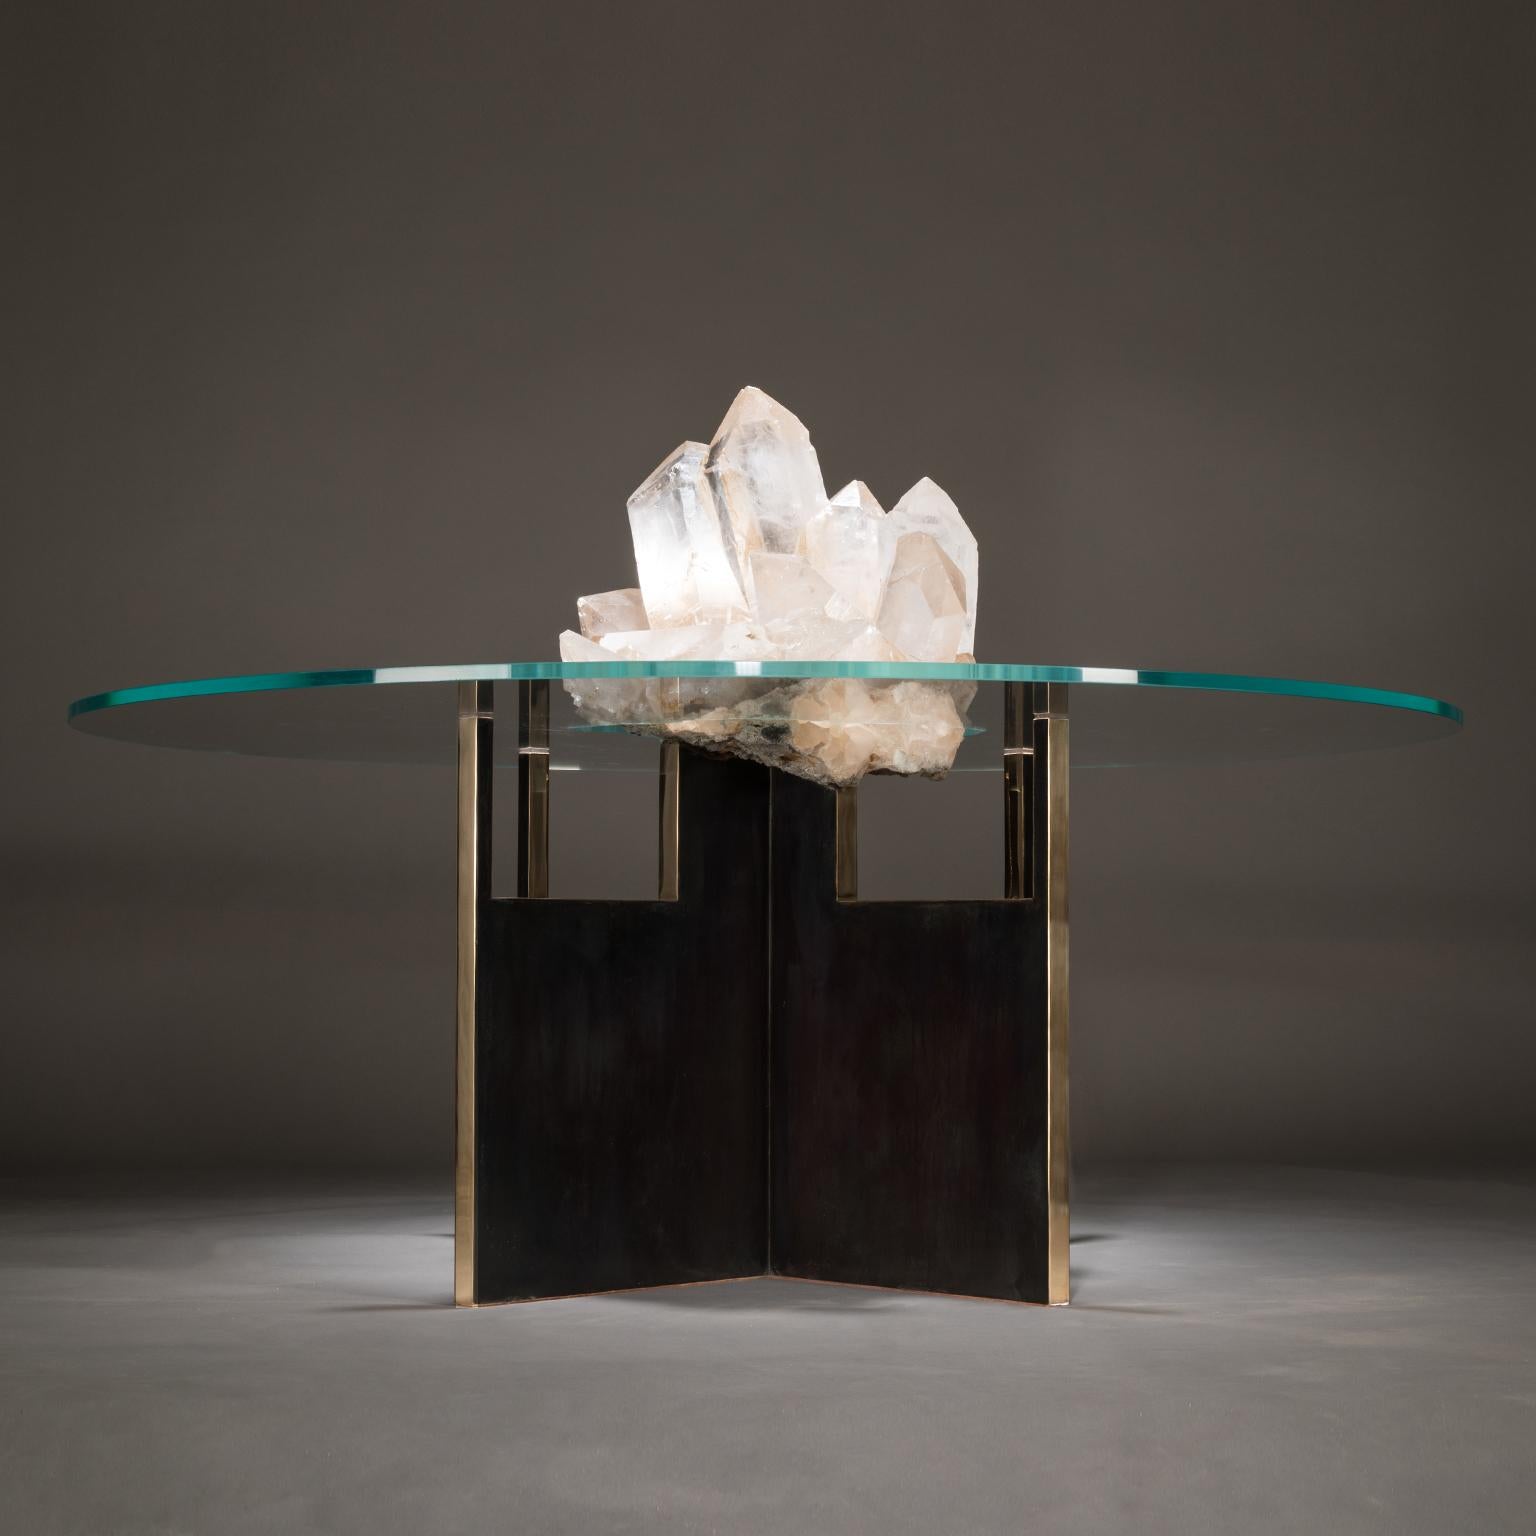 ICEBERG TABLE 4

Studio Greytak pays homage to the mighty mountains of ice with Iceberg Table 4. A series of broad prisms, each crossed with faint parallel lines reach skyward through a sea of glass. Respectfully acquired by a local family who dug